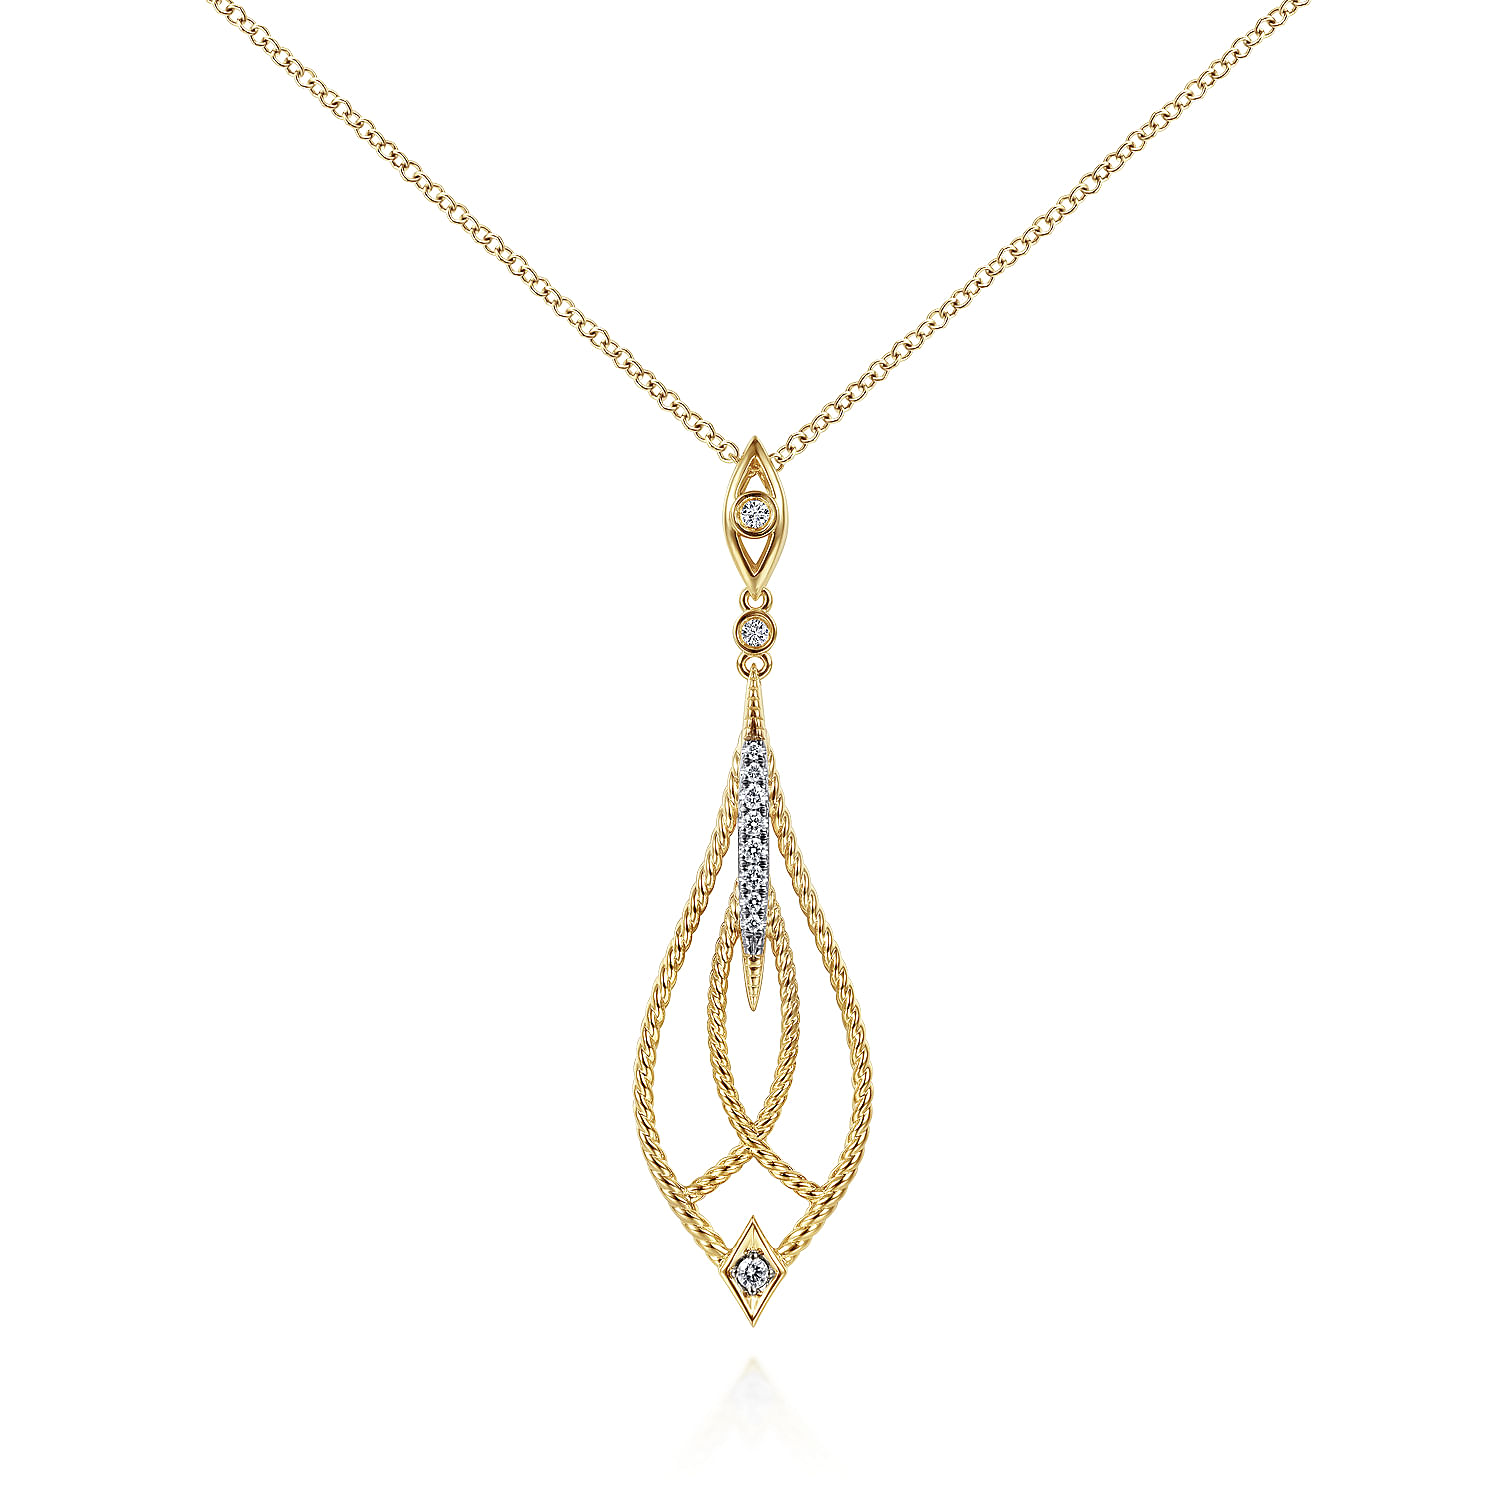 14K Yellow Gold Open Teardrop Pendant Necklace with Diamond Accents